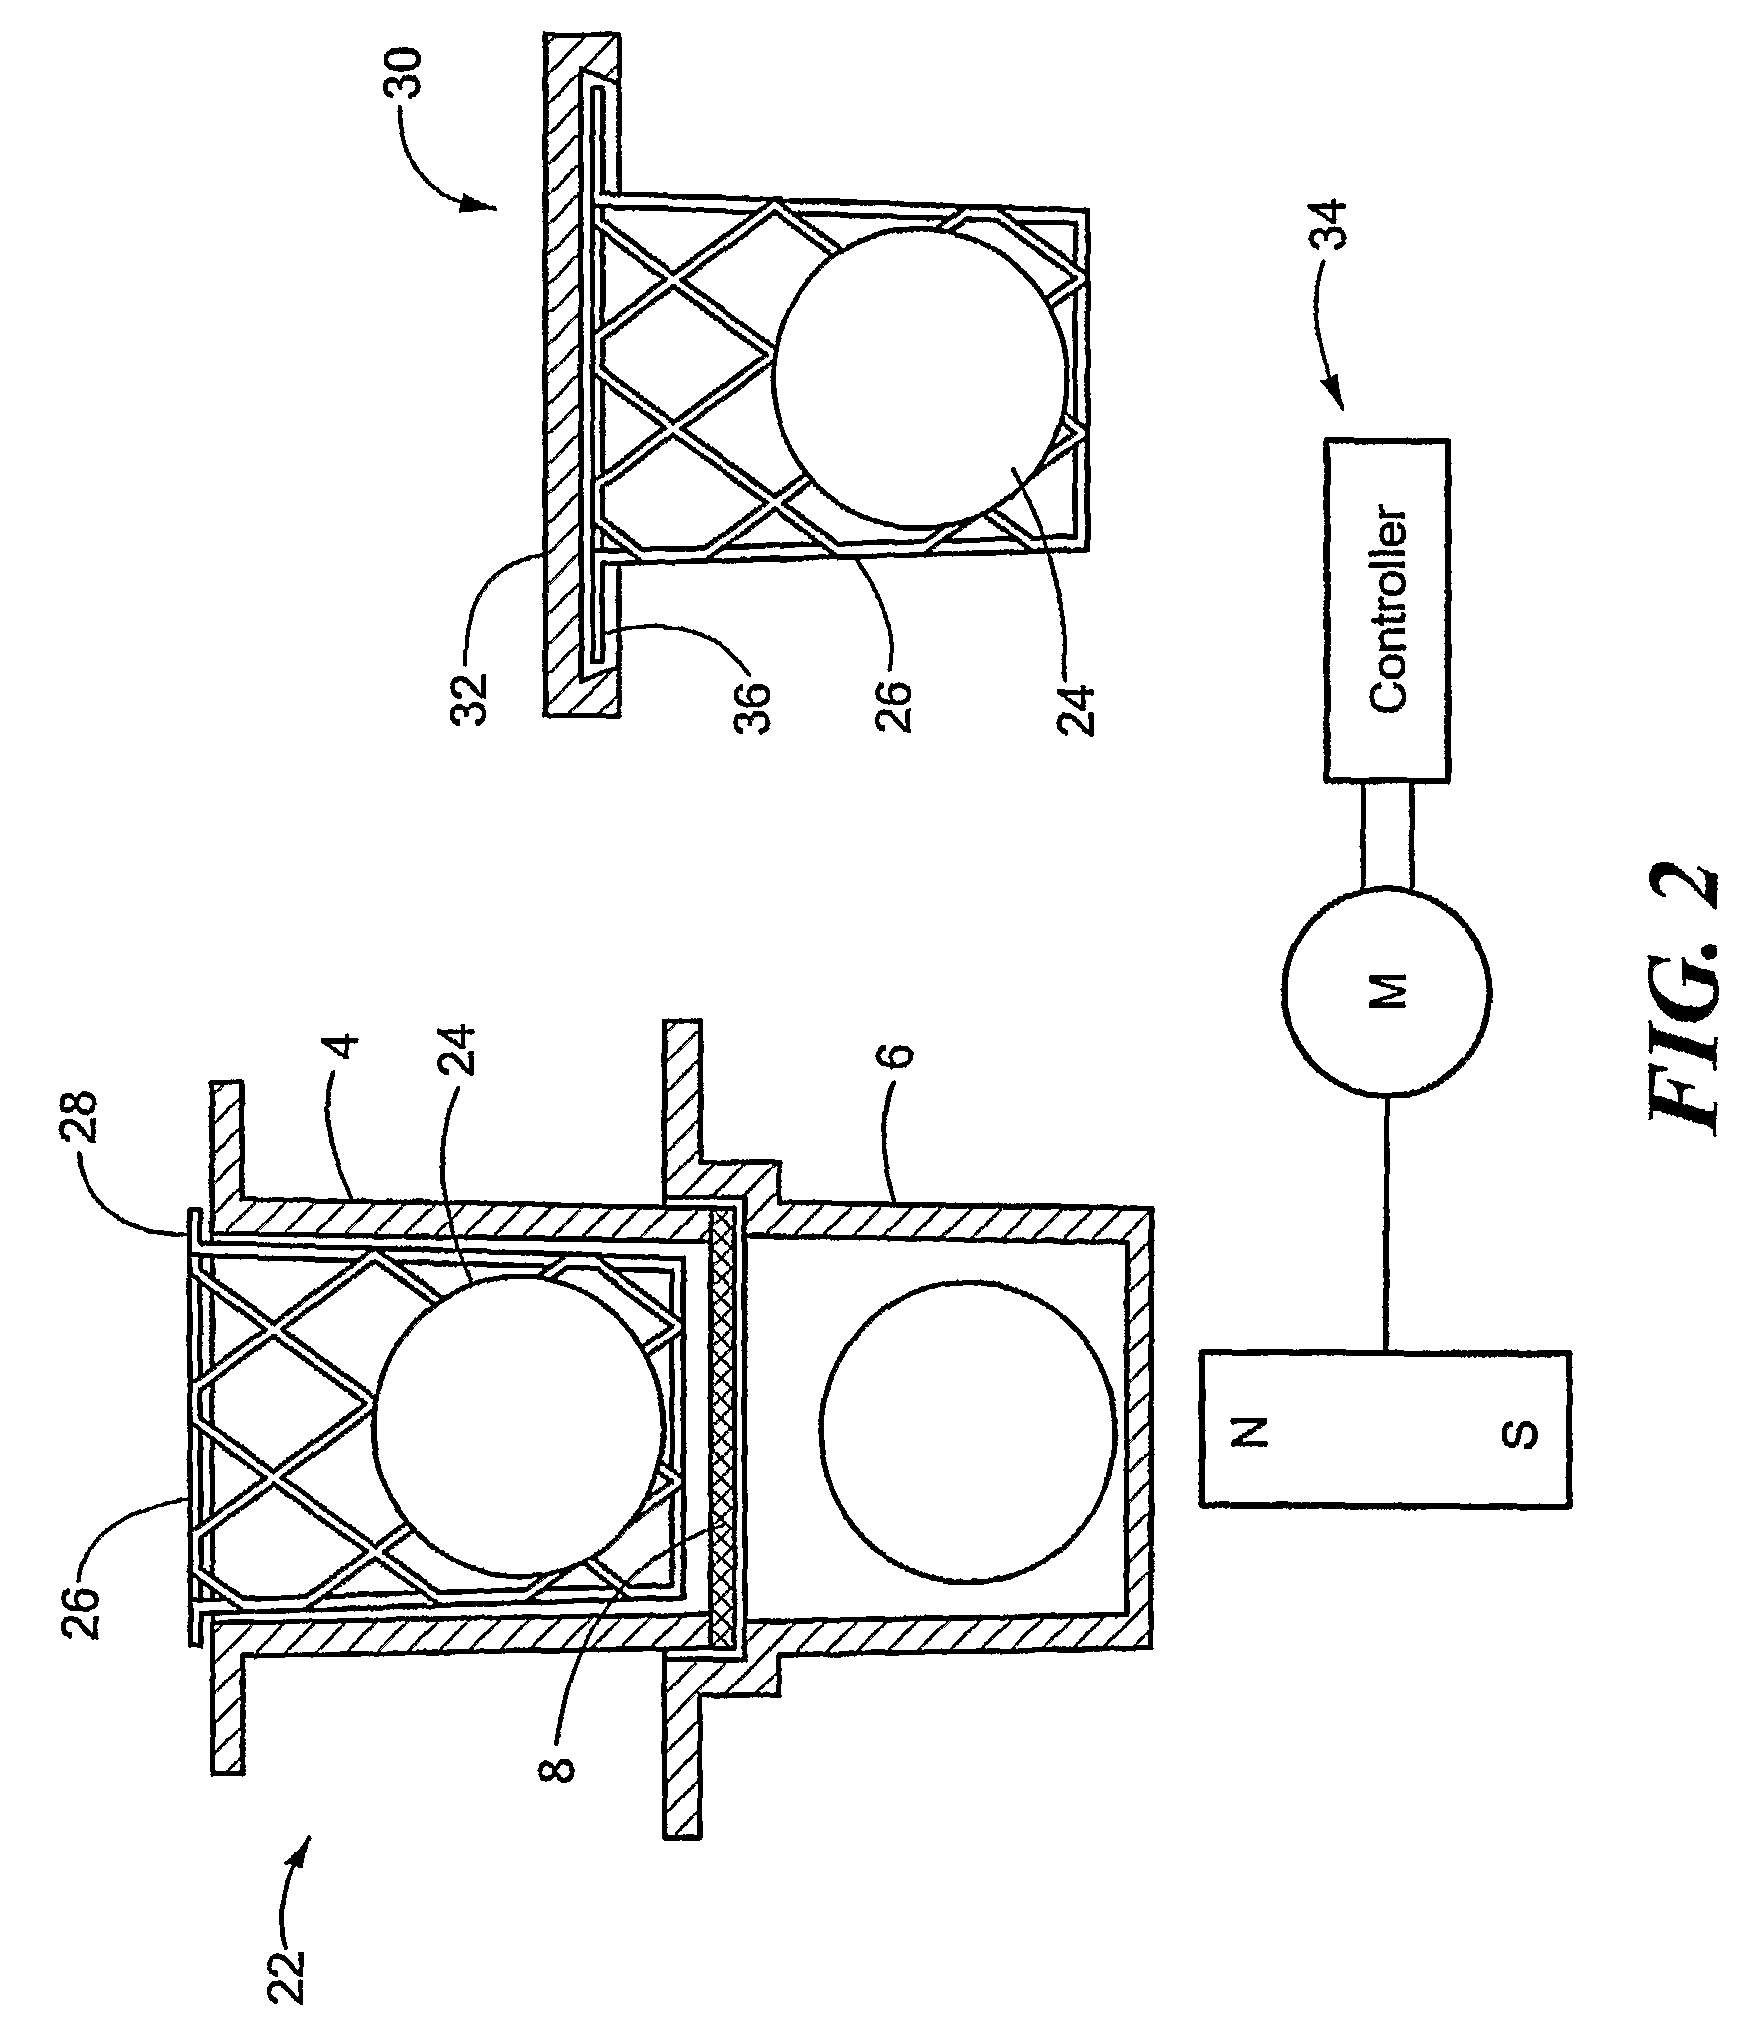 Permeation device and method for reducing aqueous boundary layer thicknesses